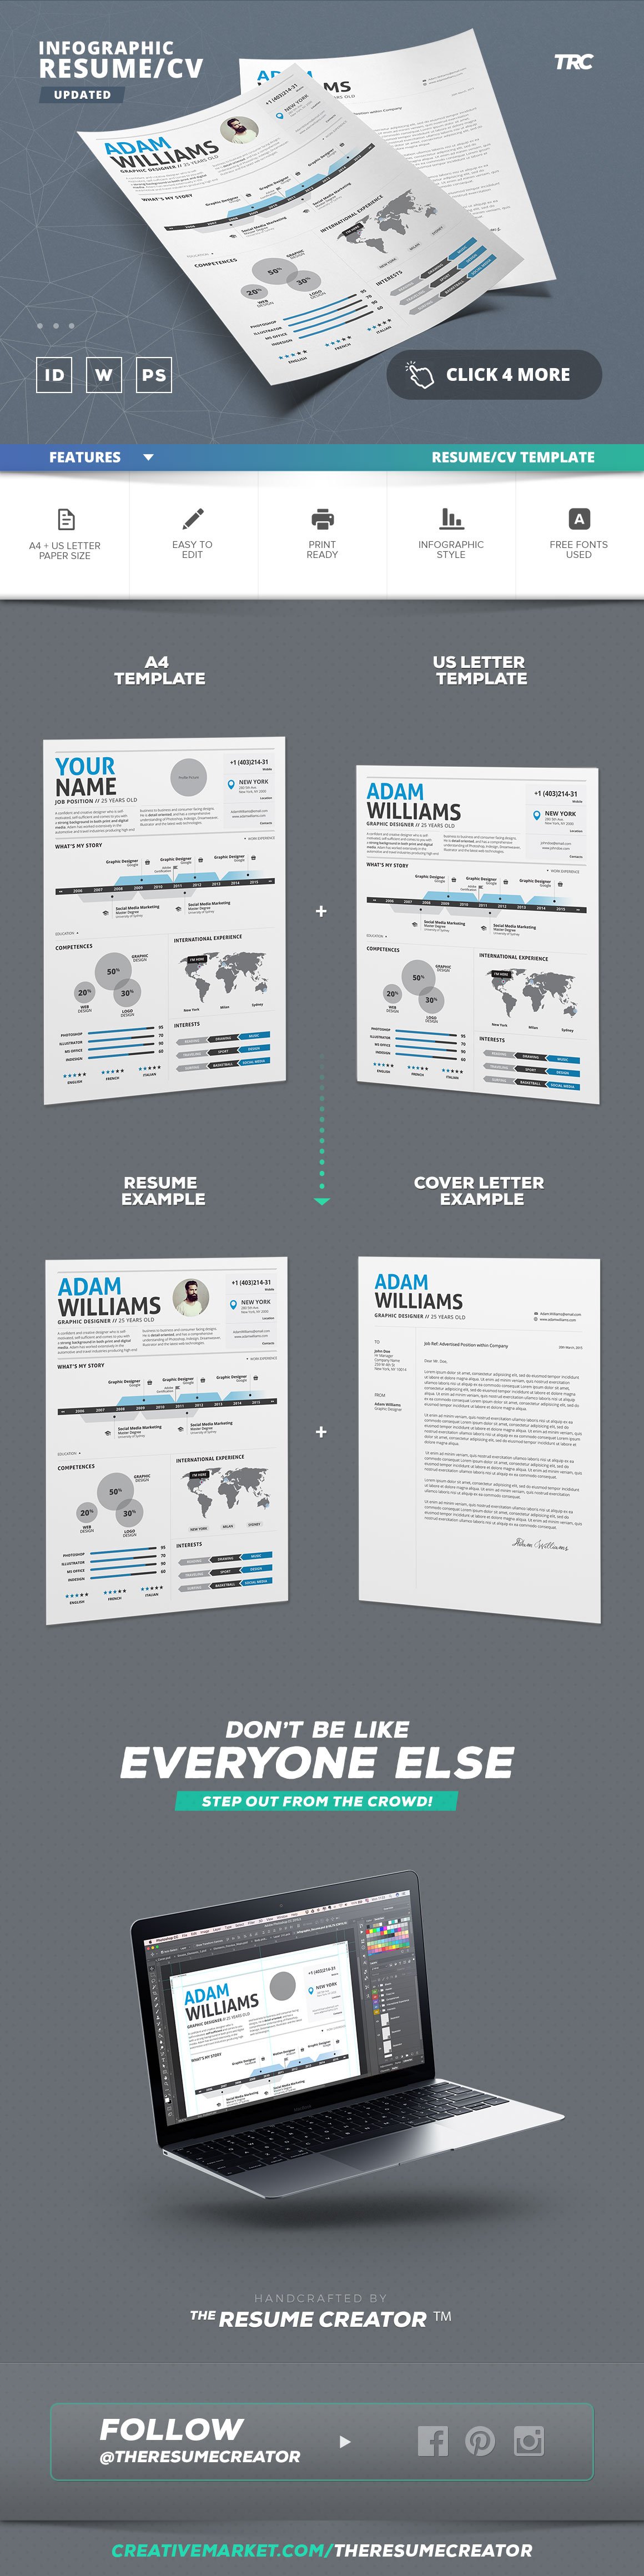 Infographic Resume/Cv Template Vol.2 preview image.